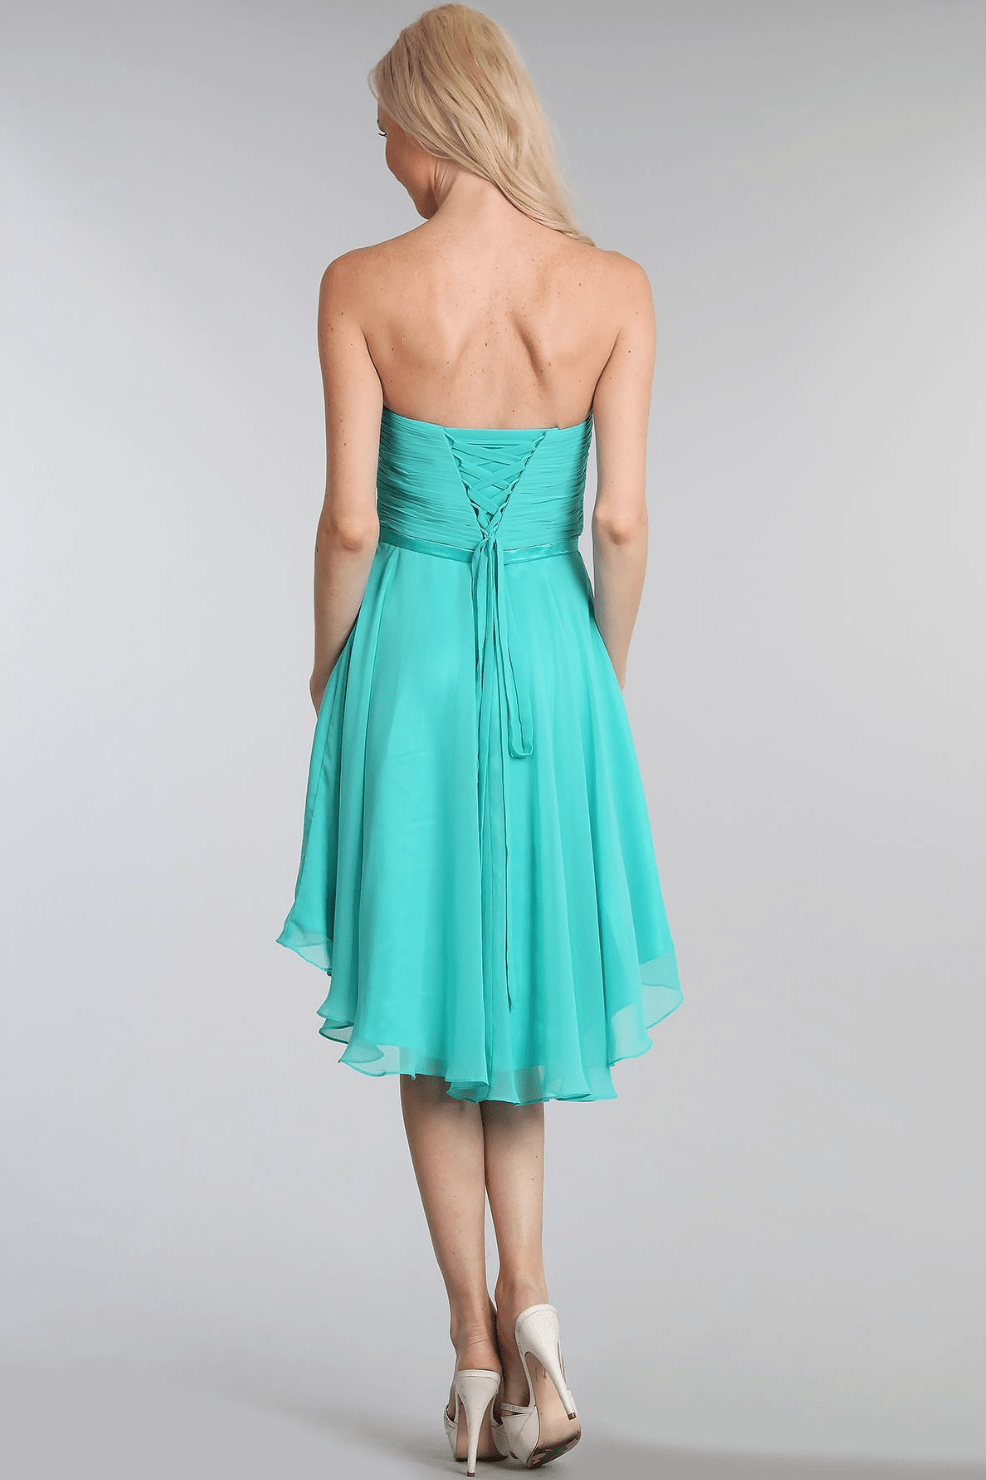 High Low Chiffon Dress by Fiesta | 4 Colors - NORMA REED